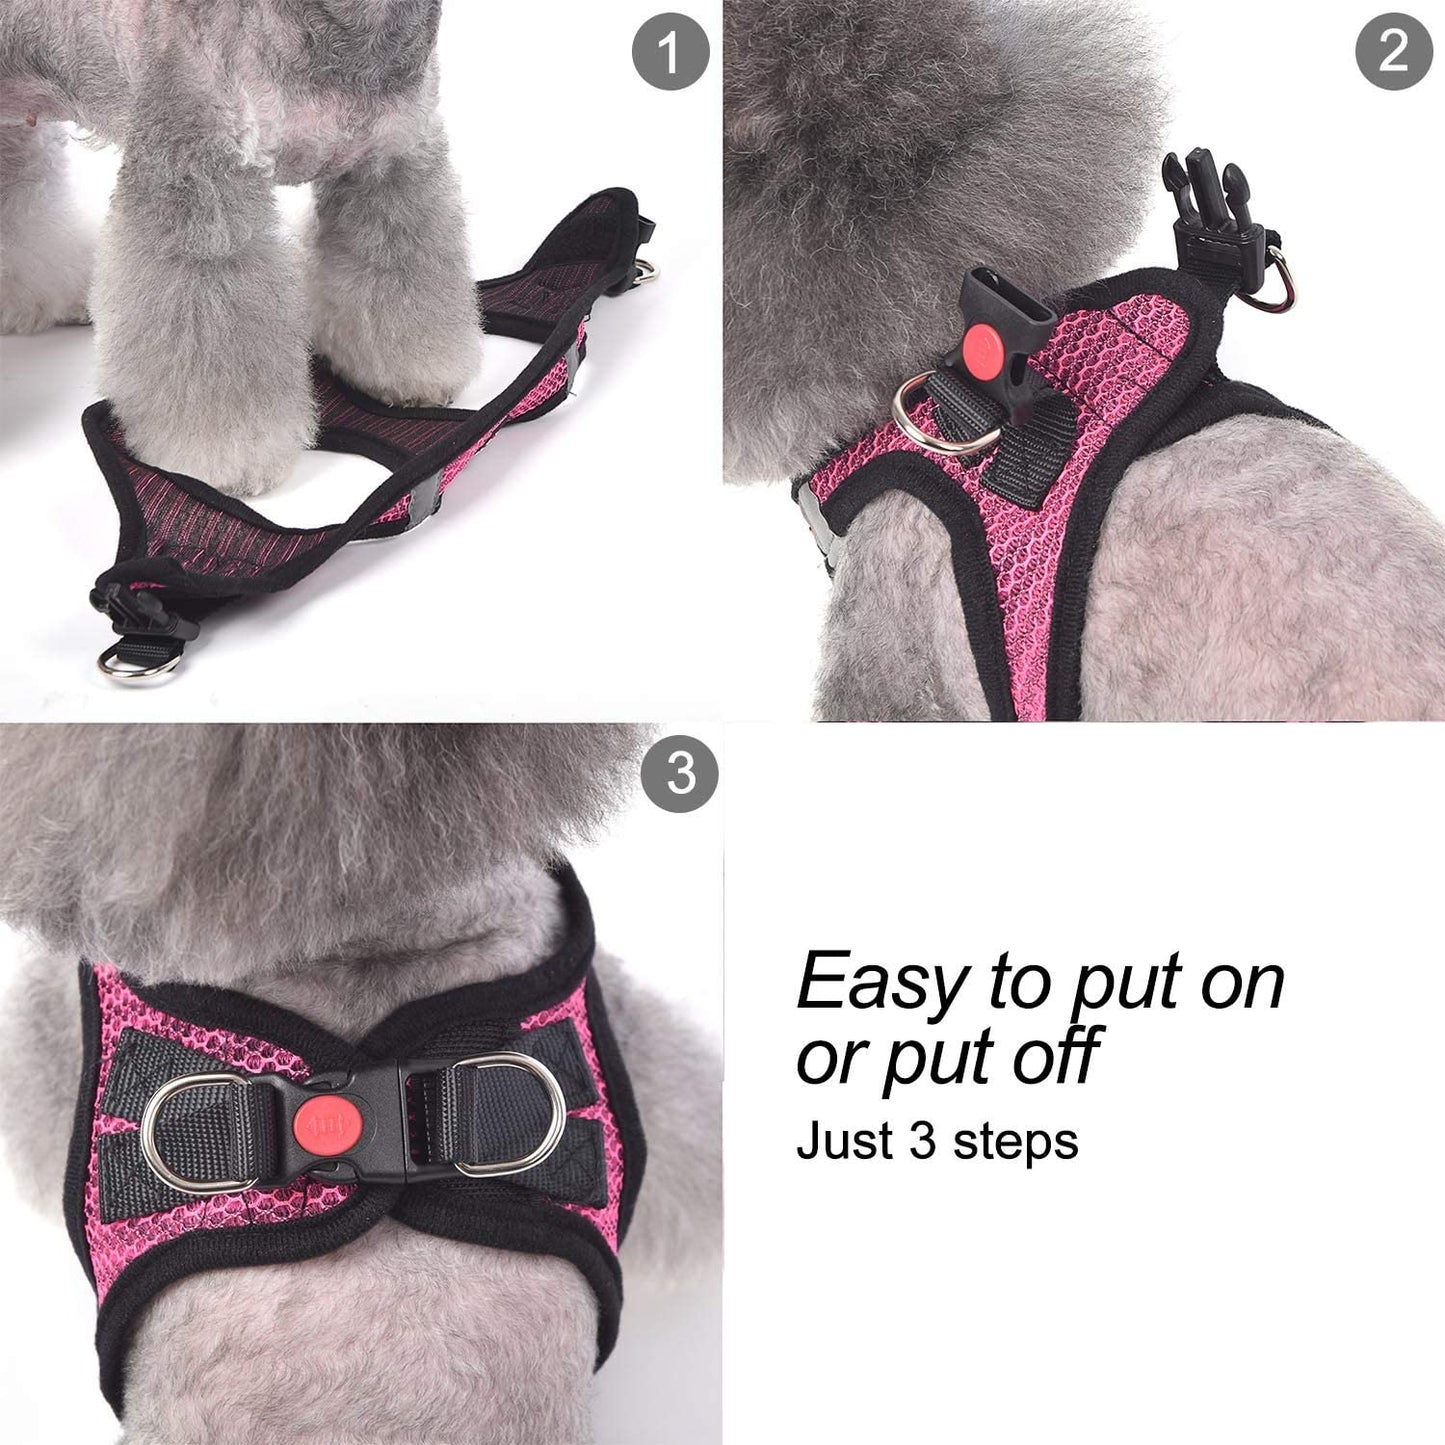 Matilor Dog Harness Step-In Breathable Puppy Cat Dog Vest Harnesses for Small Medium Dogs